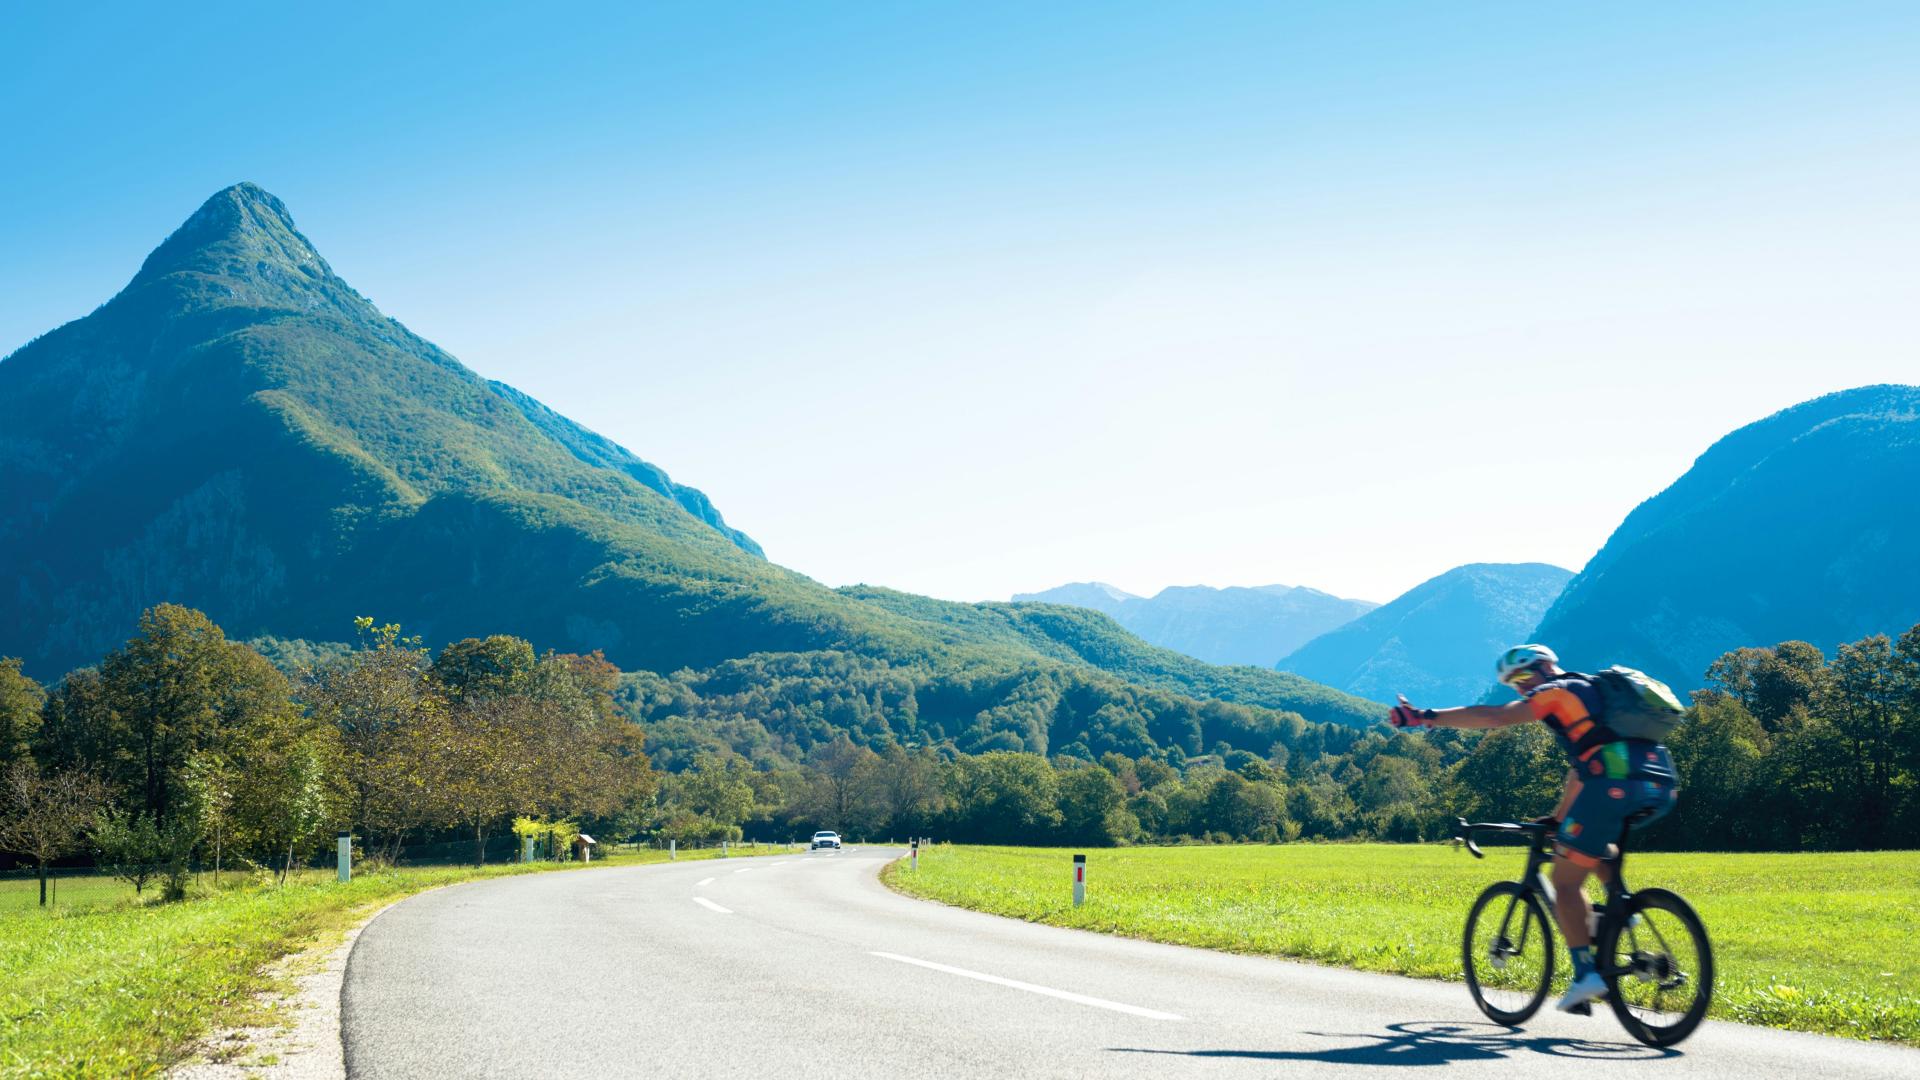 For cycling beginners, how many kilometers are suitable for one day?